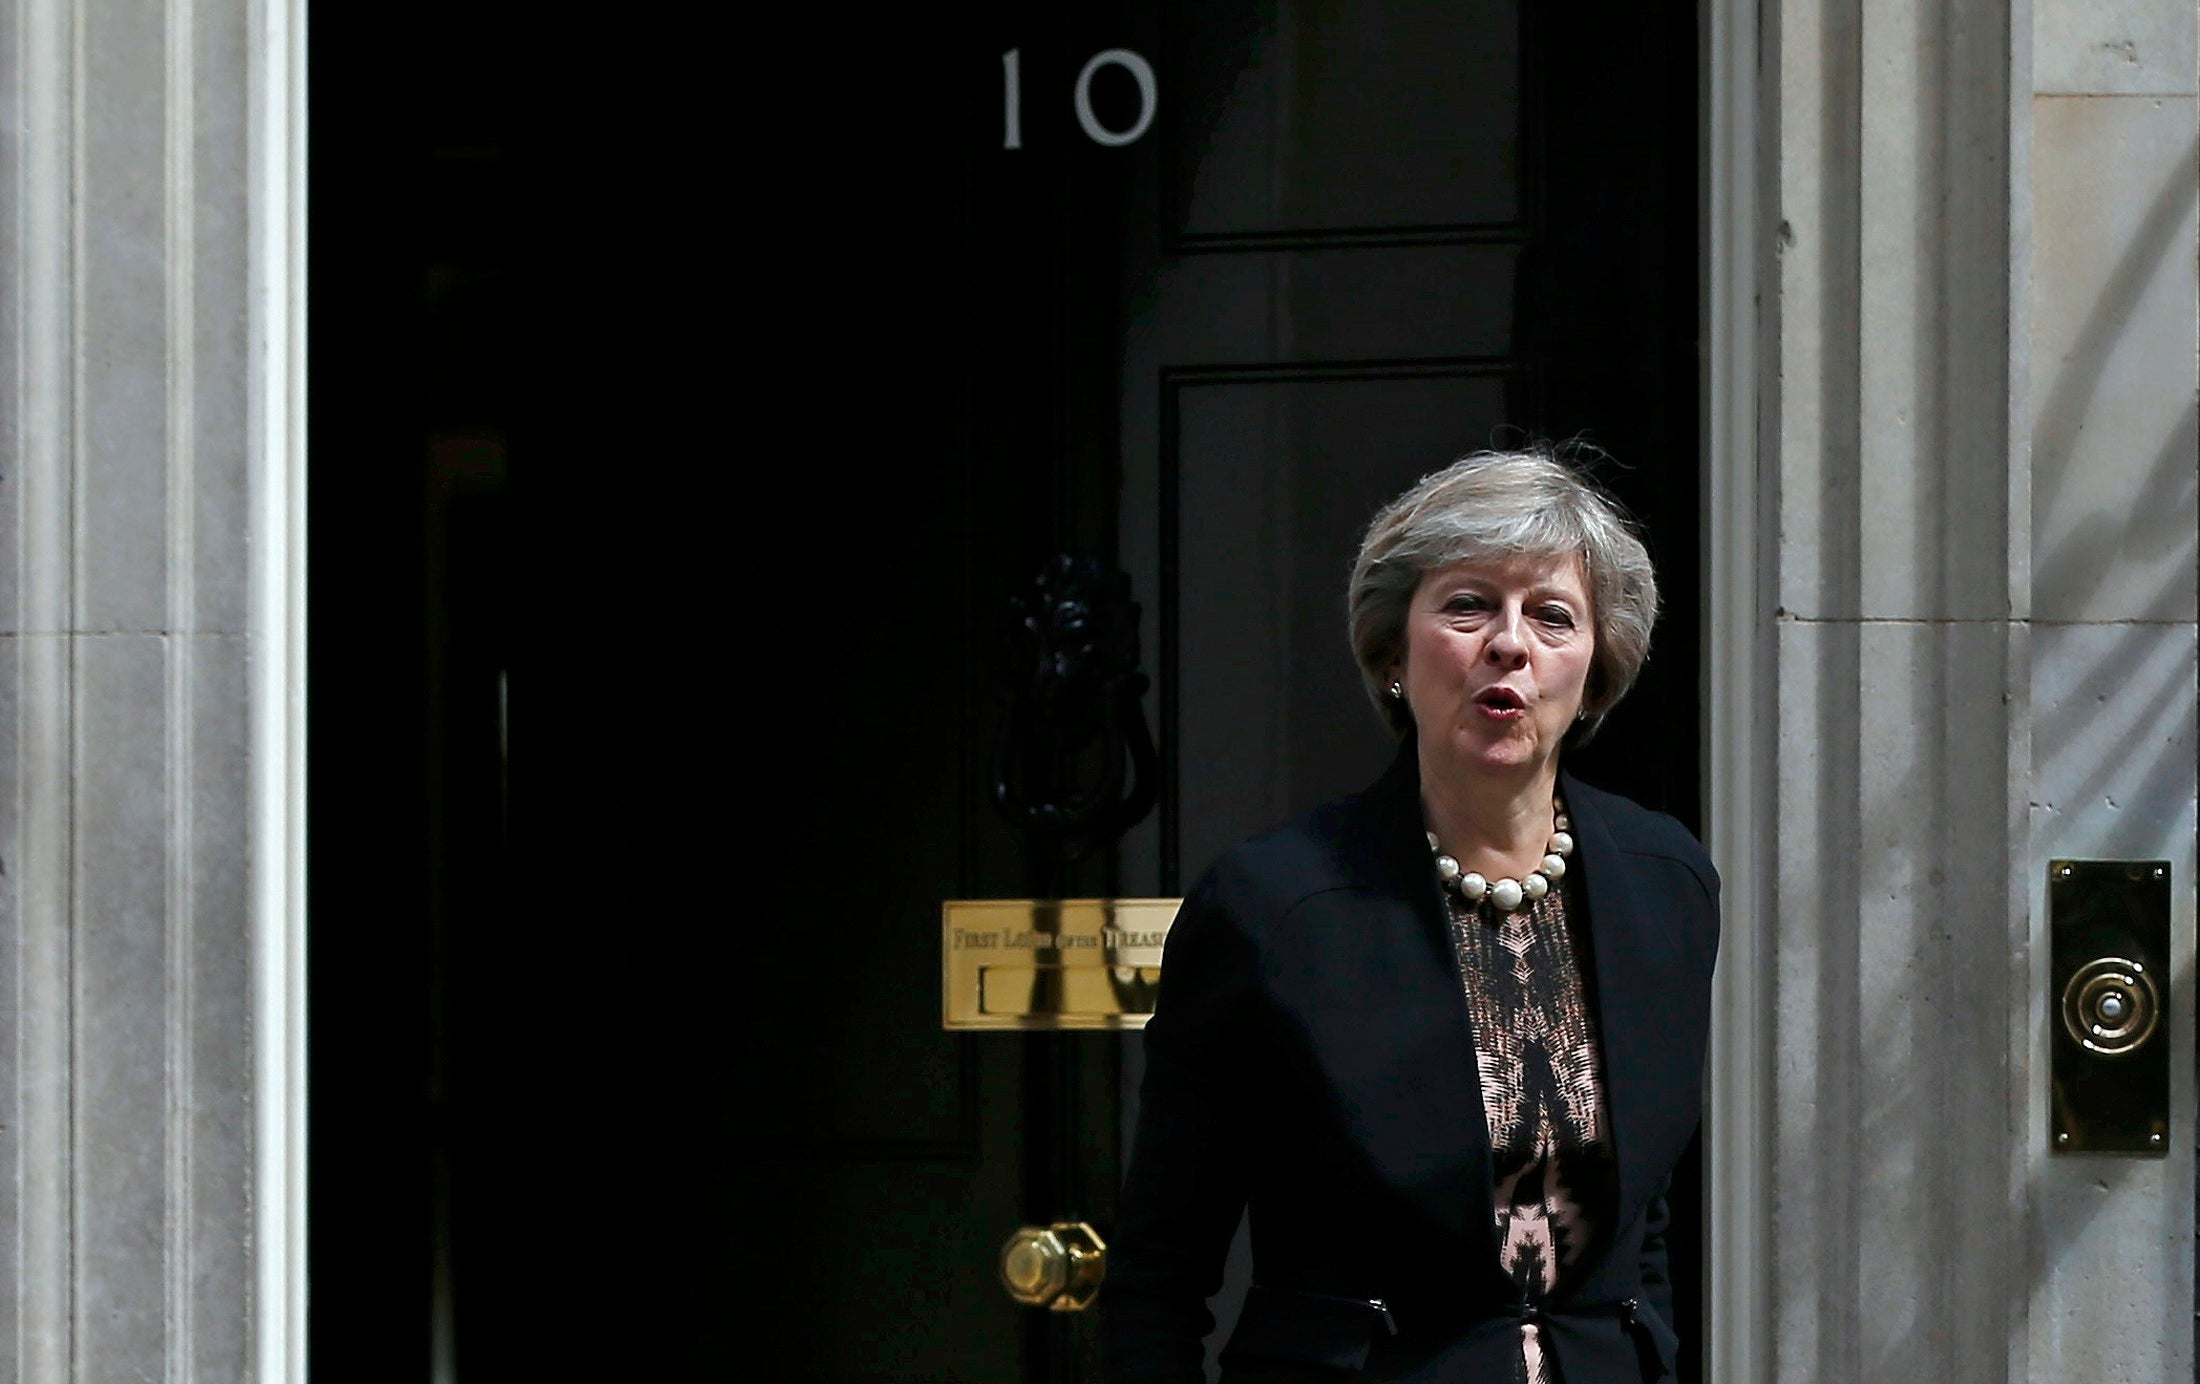 Theresa May leaves after attending a cabinet meeting at Number 10